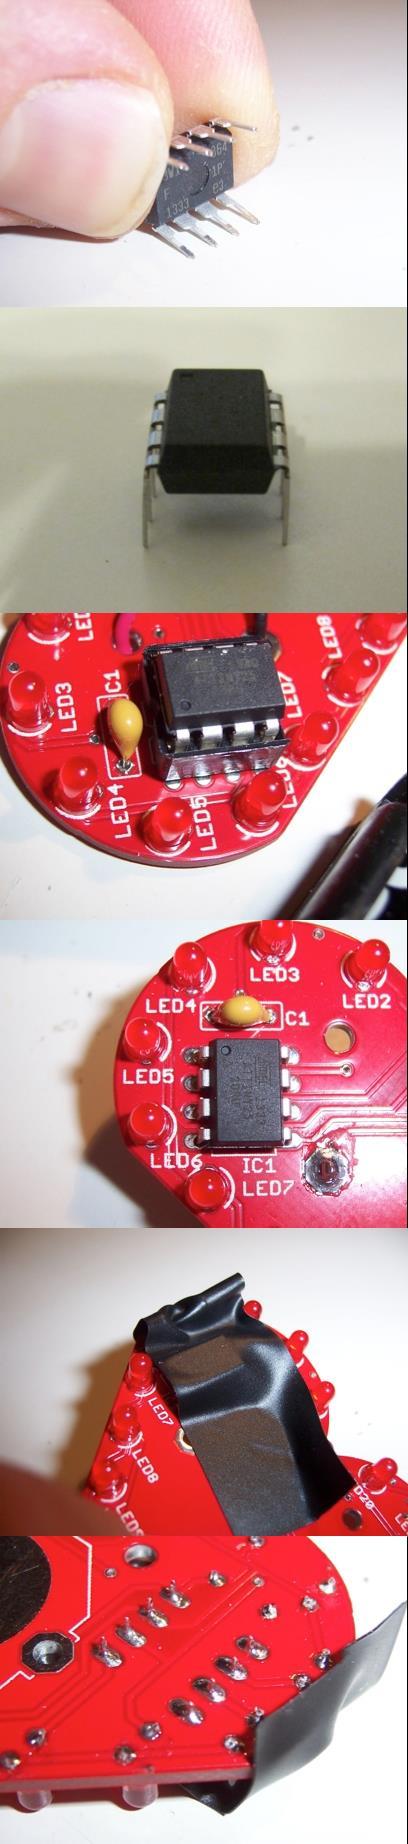 You need to bend the leads on the ATTiny25 IC to make them parallel, so that they fit in the socket nicely.